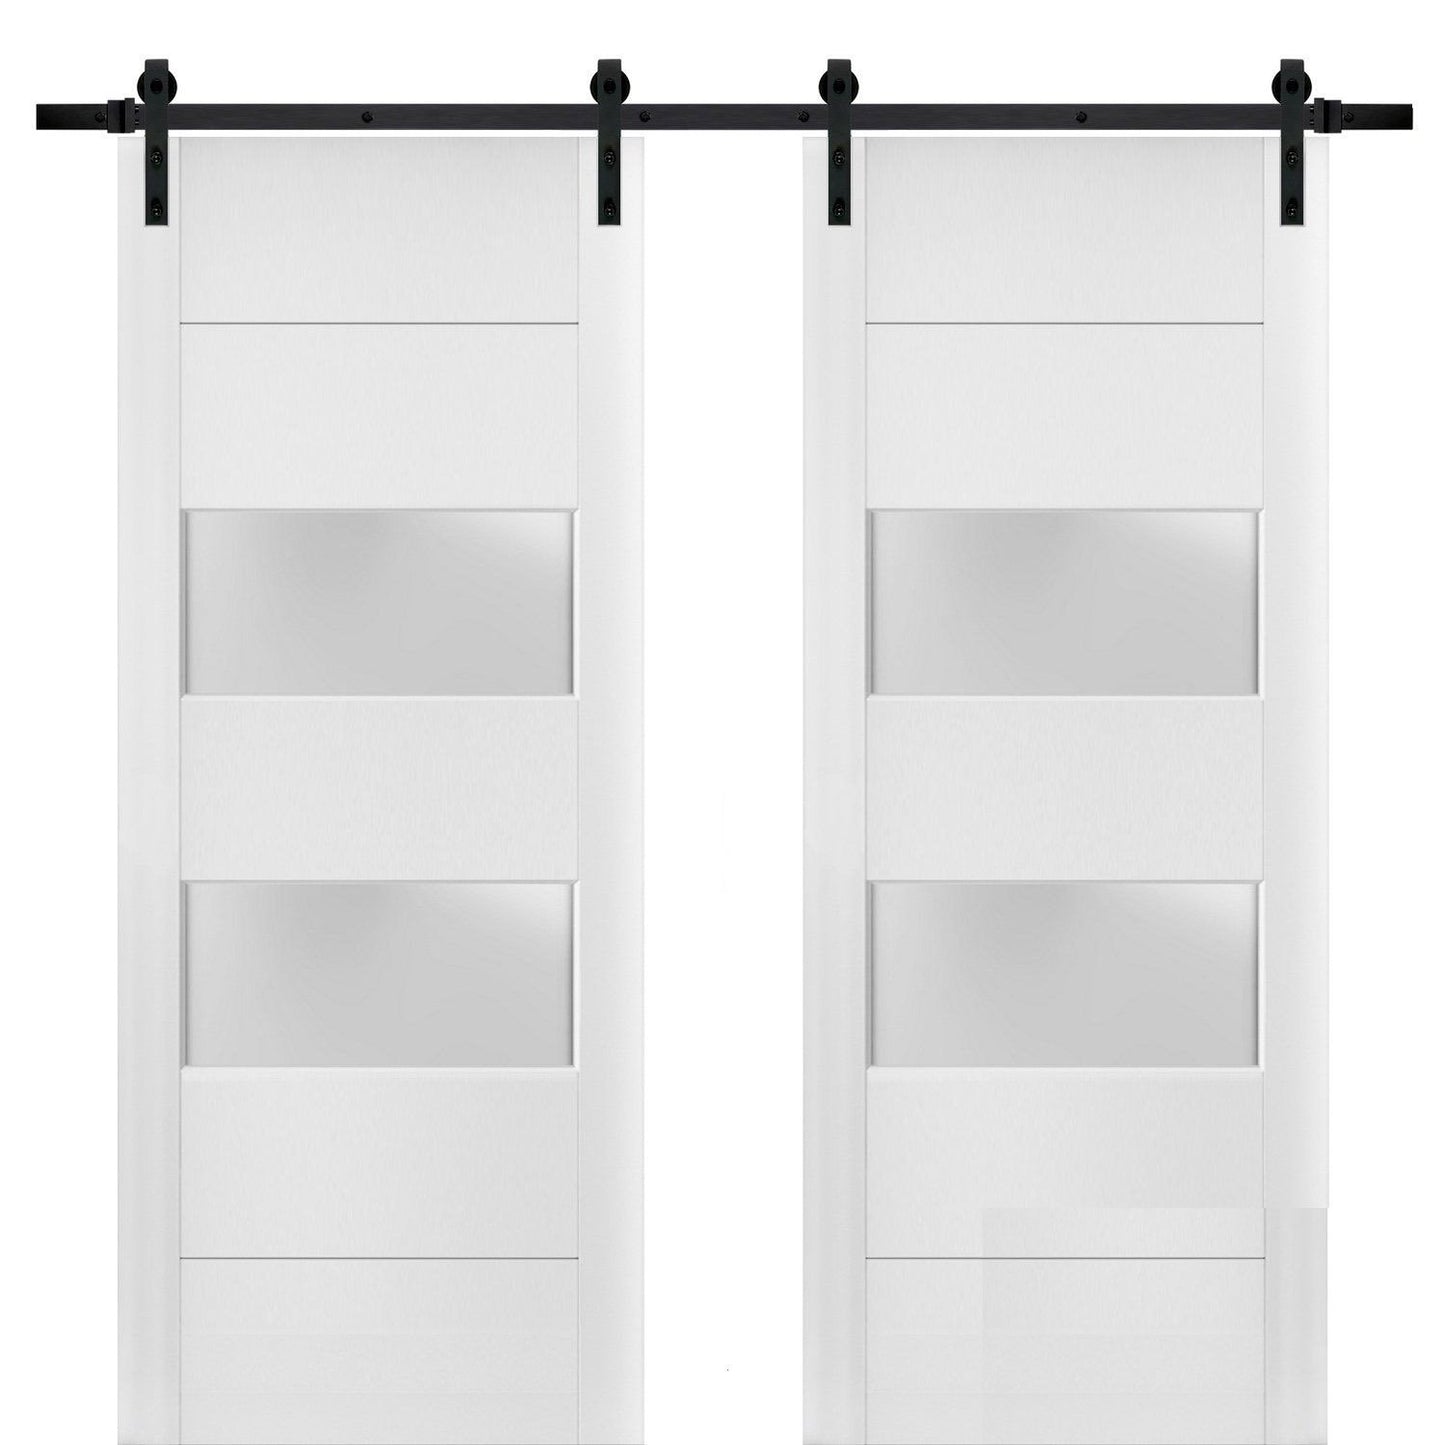 Lucia 4010 White Silk Double Barn Door with 2 Lites Frosted Glass | Black Rail